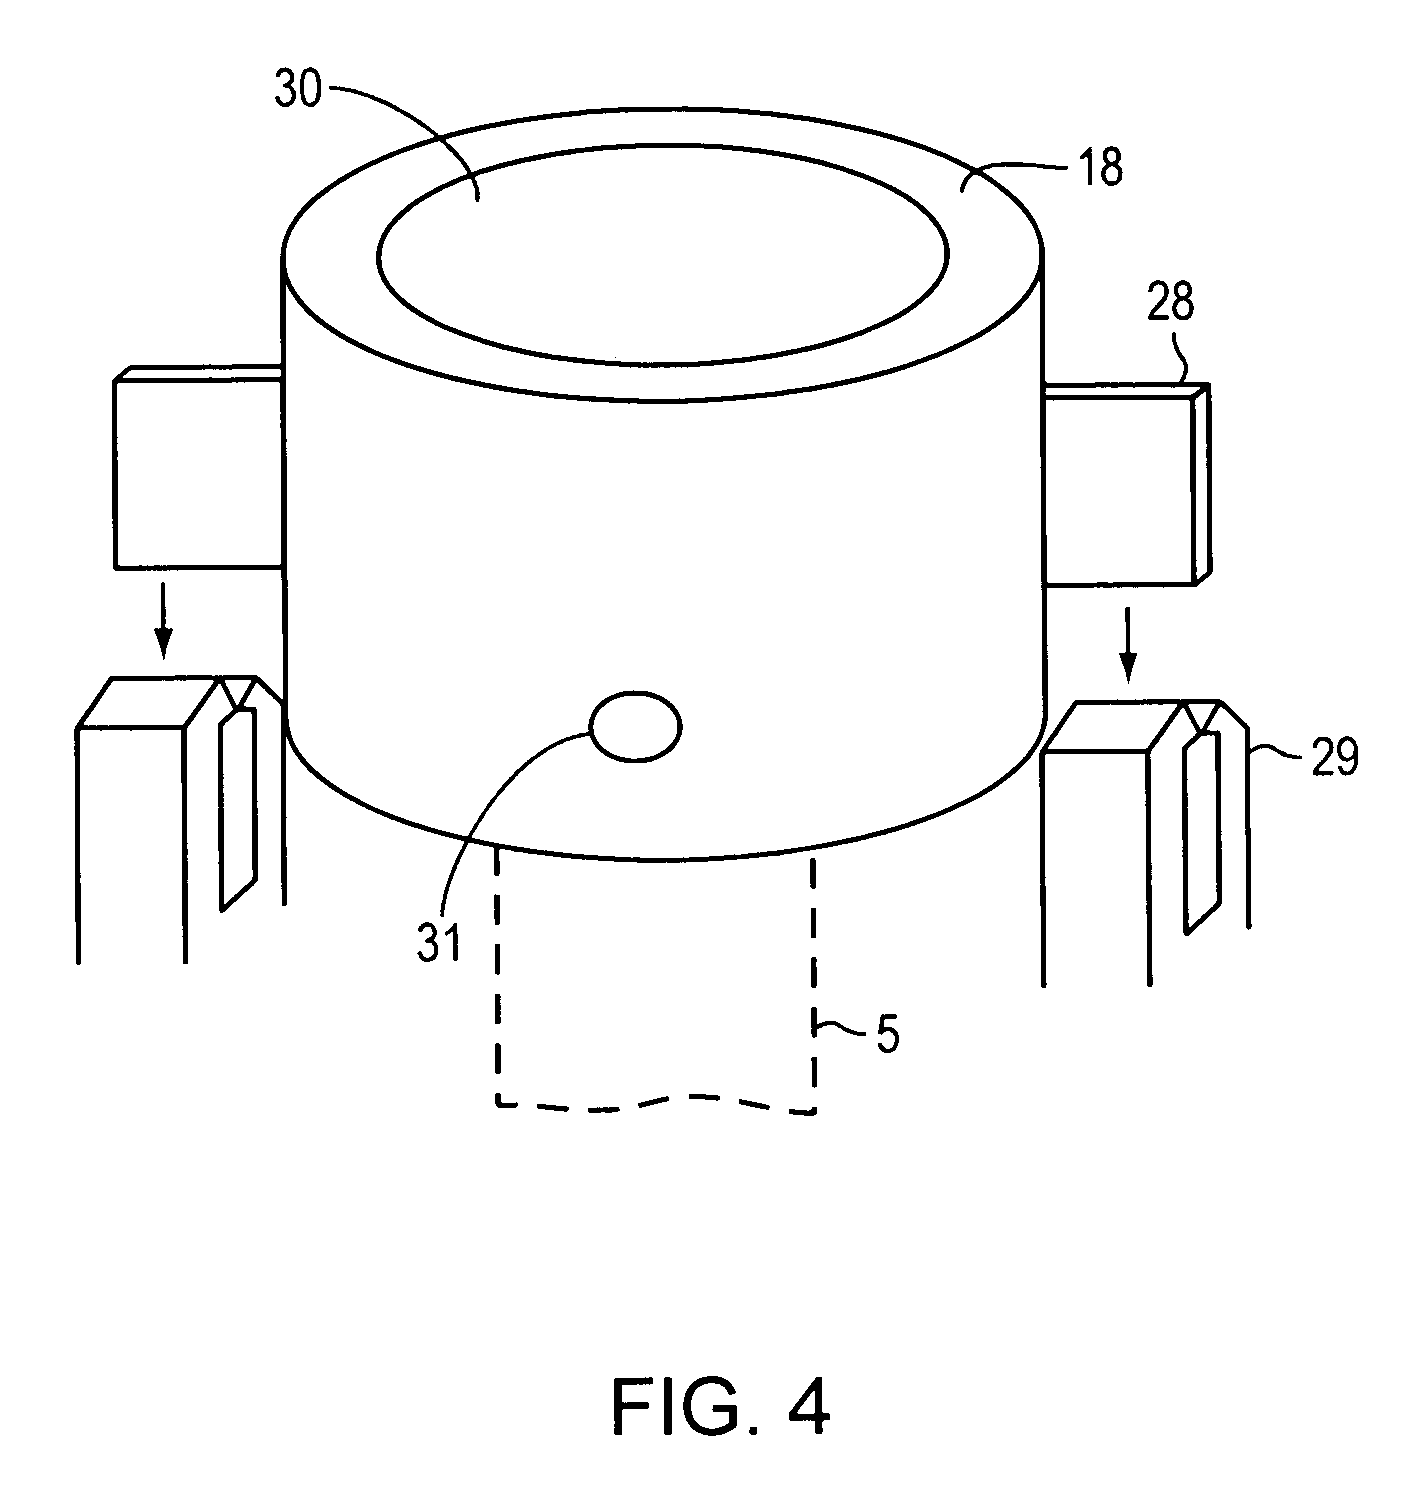 Cannula insertion device and related methods